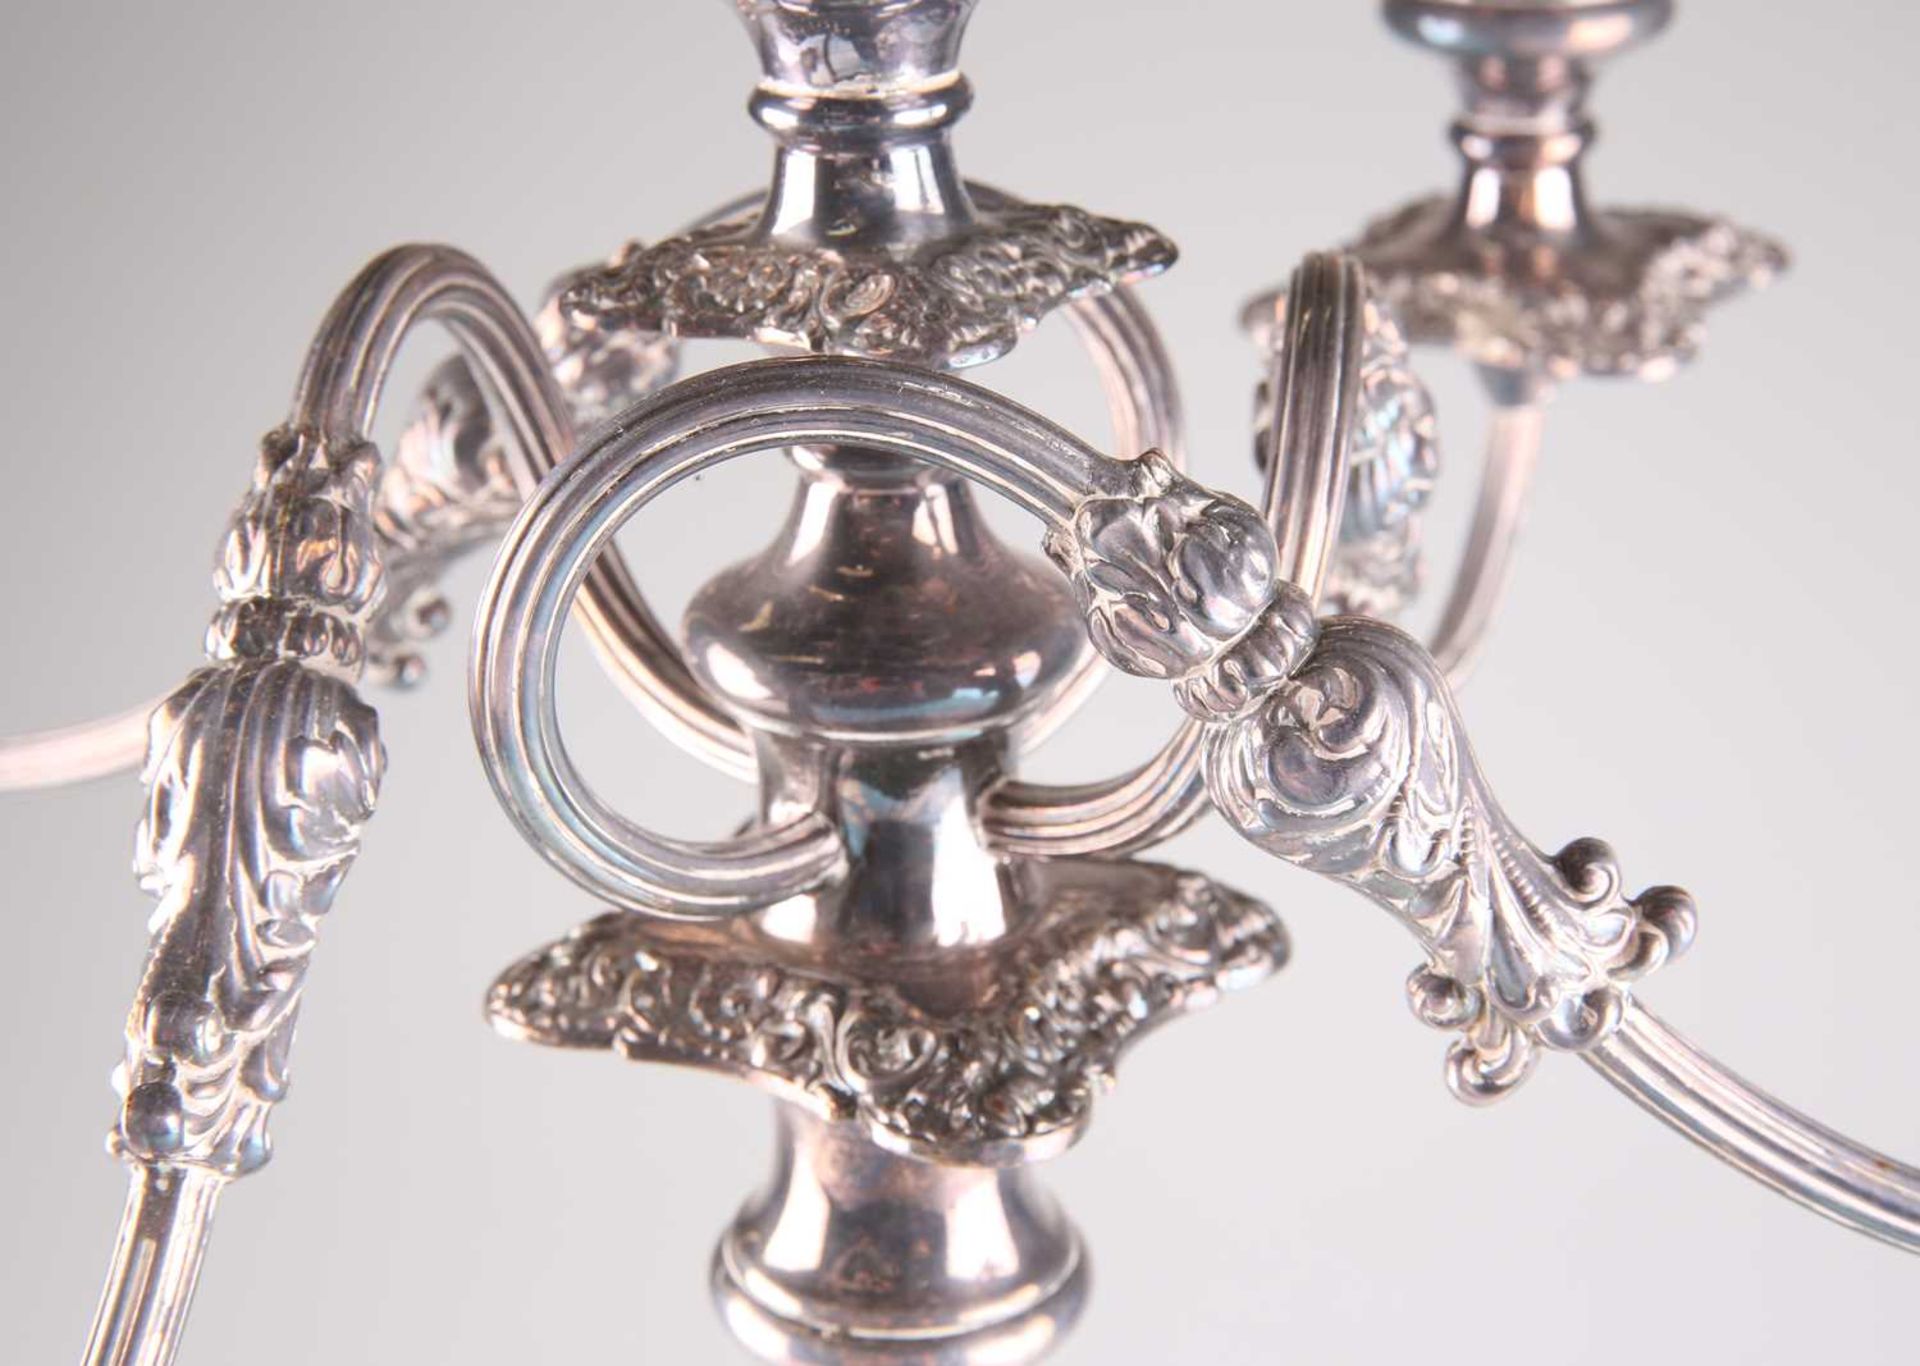 A LARGE 19TH CENTURY SILVER-PLATED CANDELABRUM - Image 4 of 4